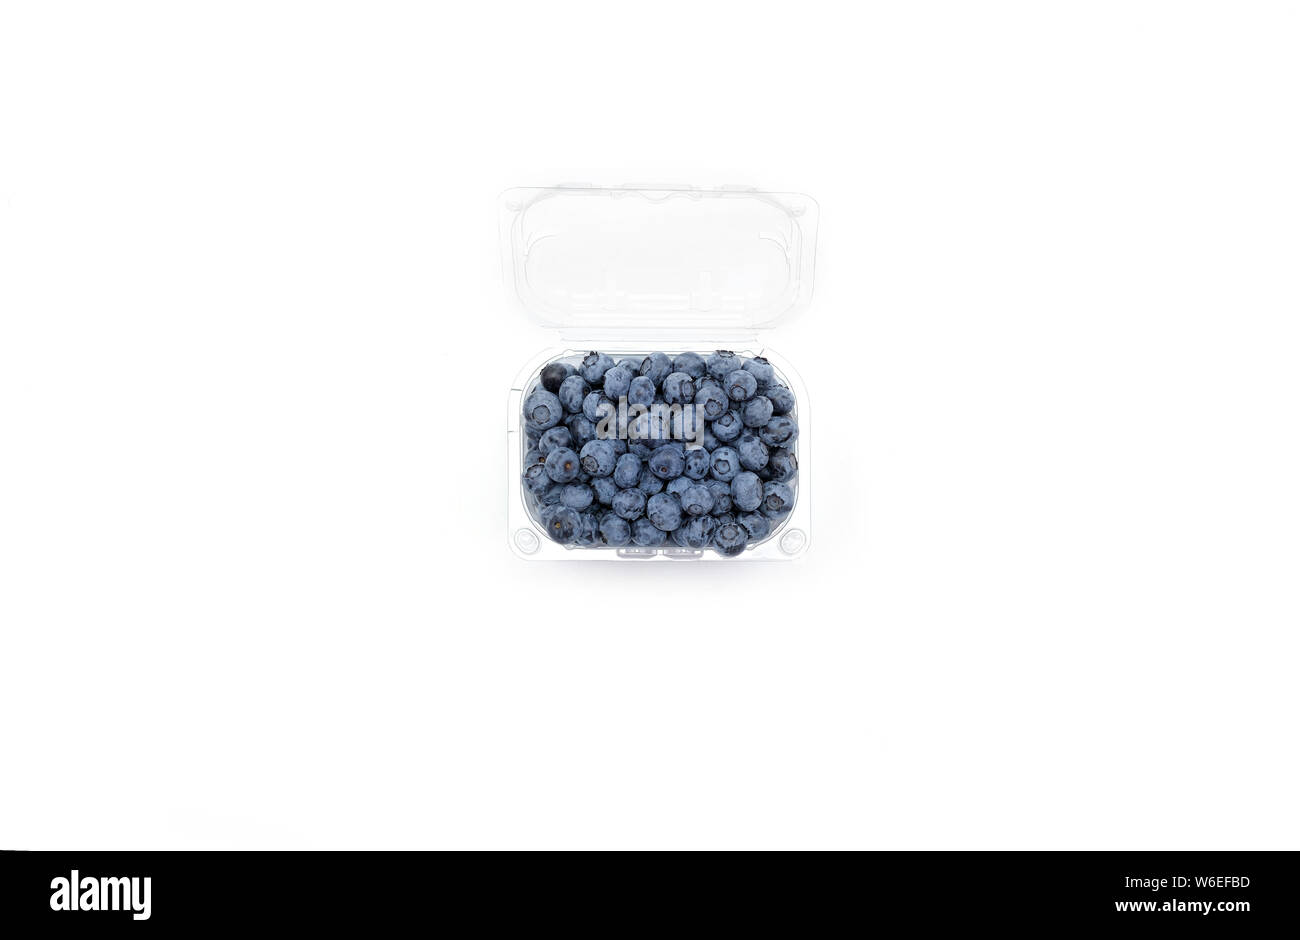 Organic blueberries in the plastic container.Flat lay concept of berries in plastic on white background with copy space in minimal style. Stock Photo